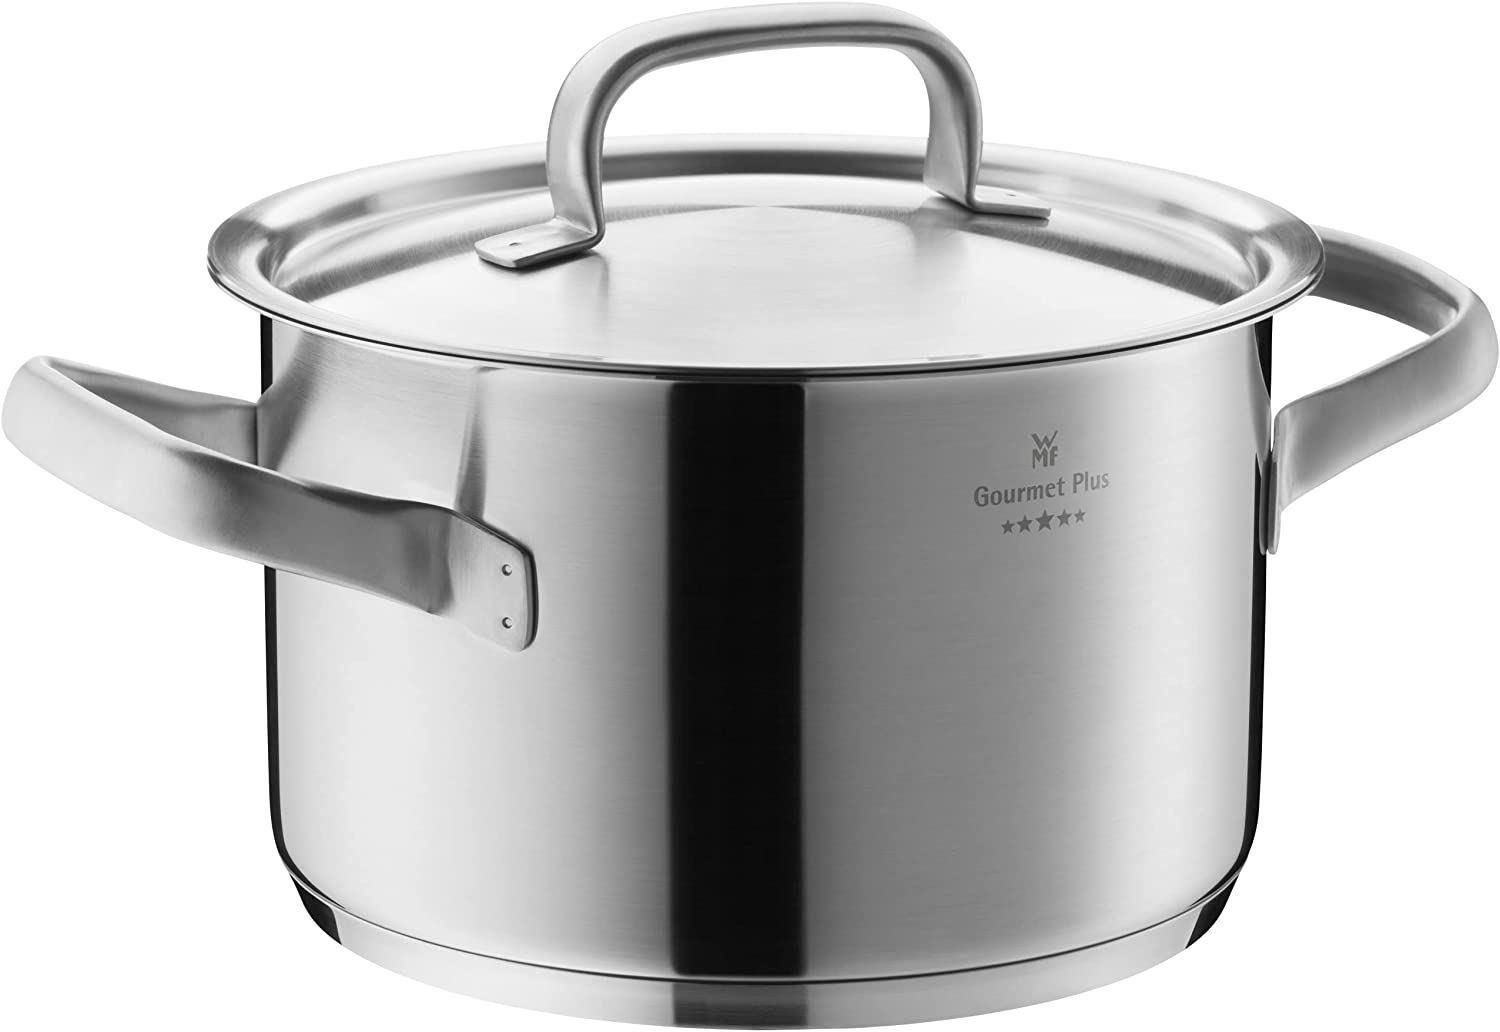 WMF cookware Ø 20 cm approx. 3,9l Gourmet Plus Inside scaling vapor hole hollow side handles metal lid Cromargan stainless steel suitable for all stove tops including induction dishwasher-safe